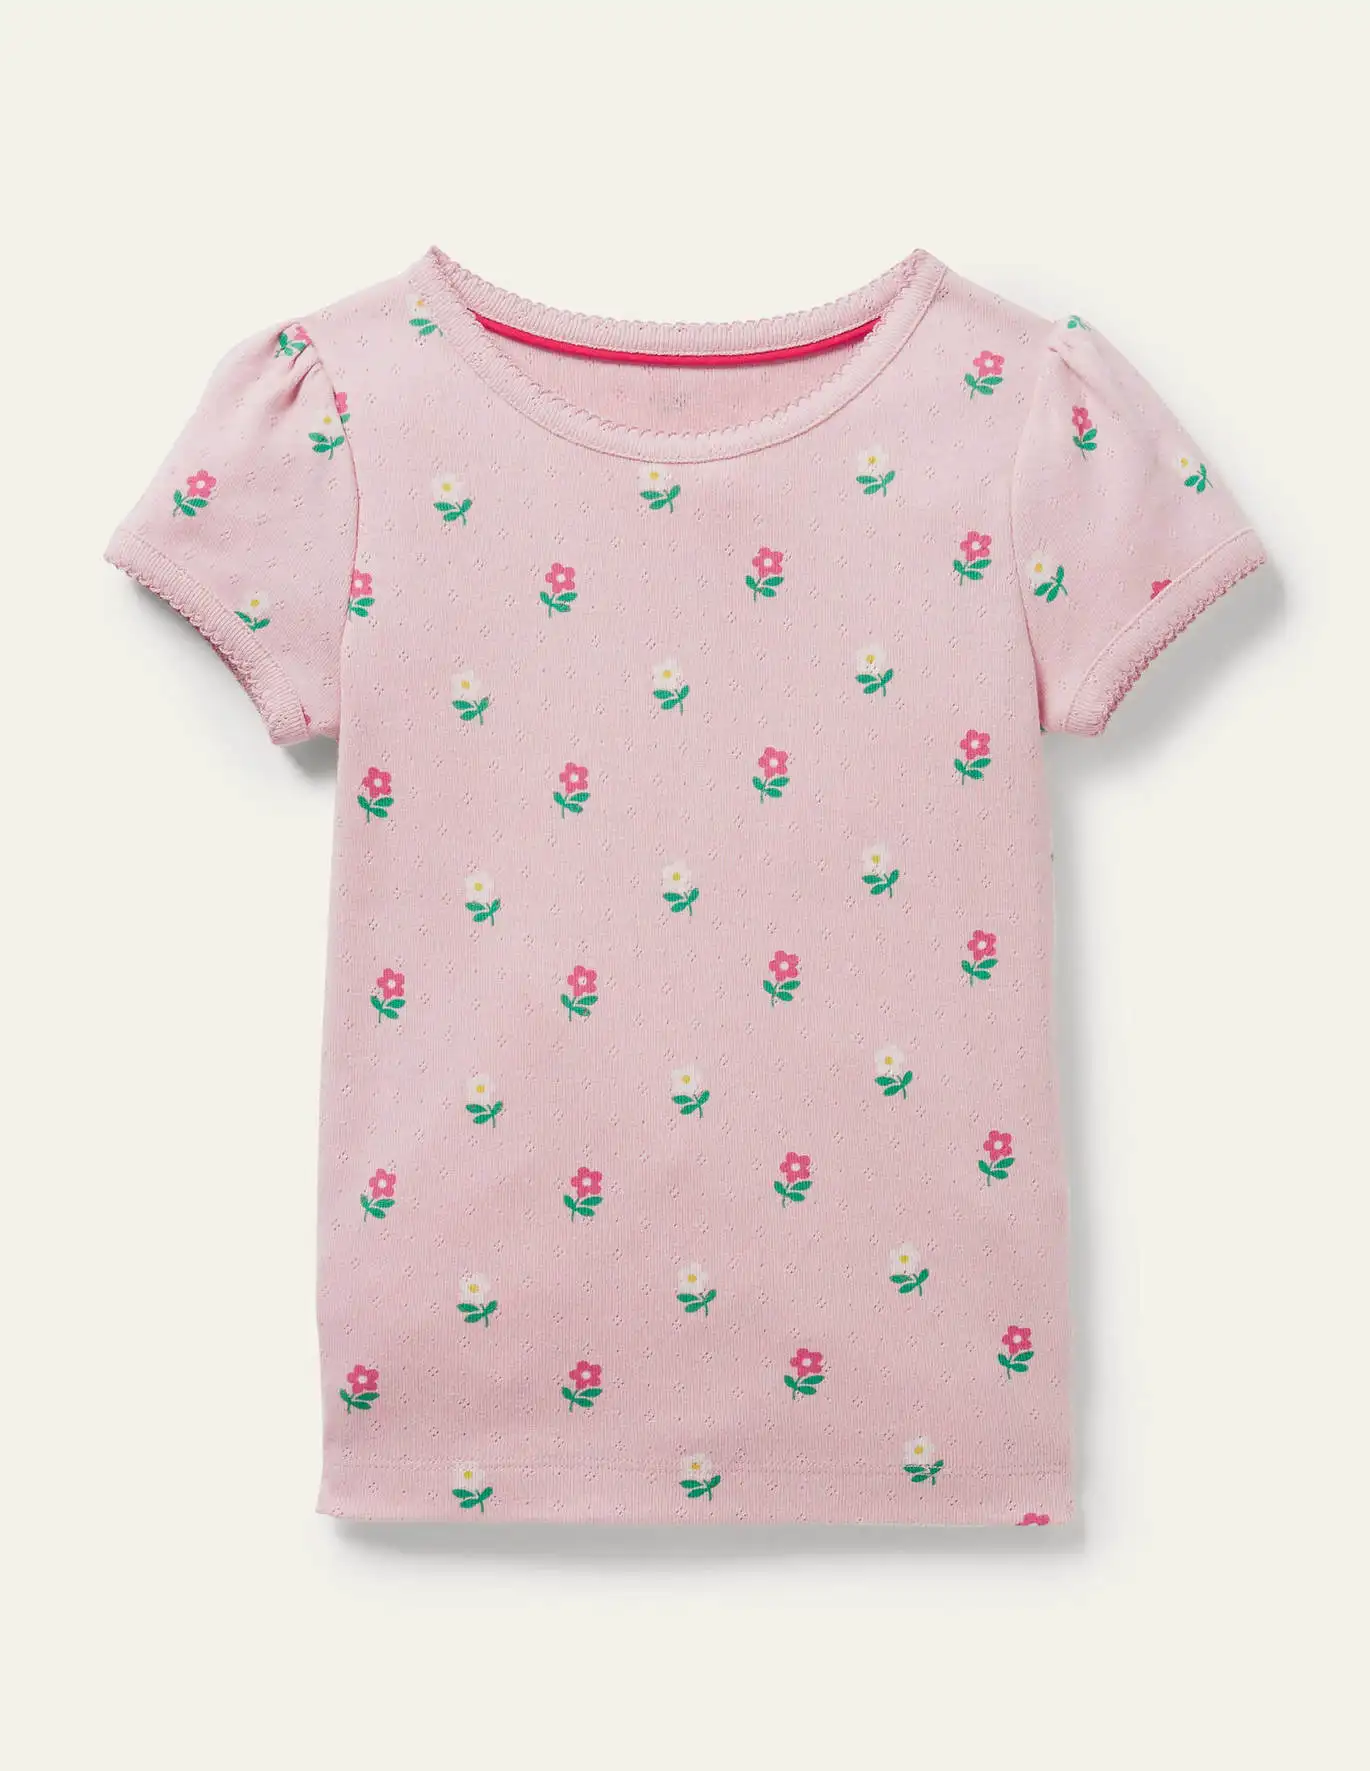 High quality organic cotton baby girls top available in different designs